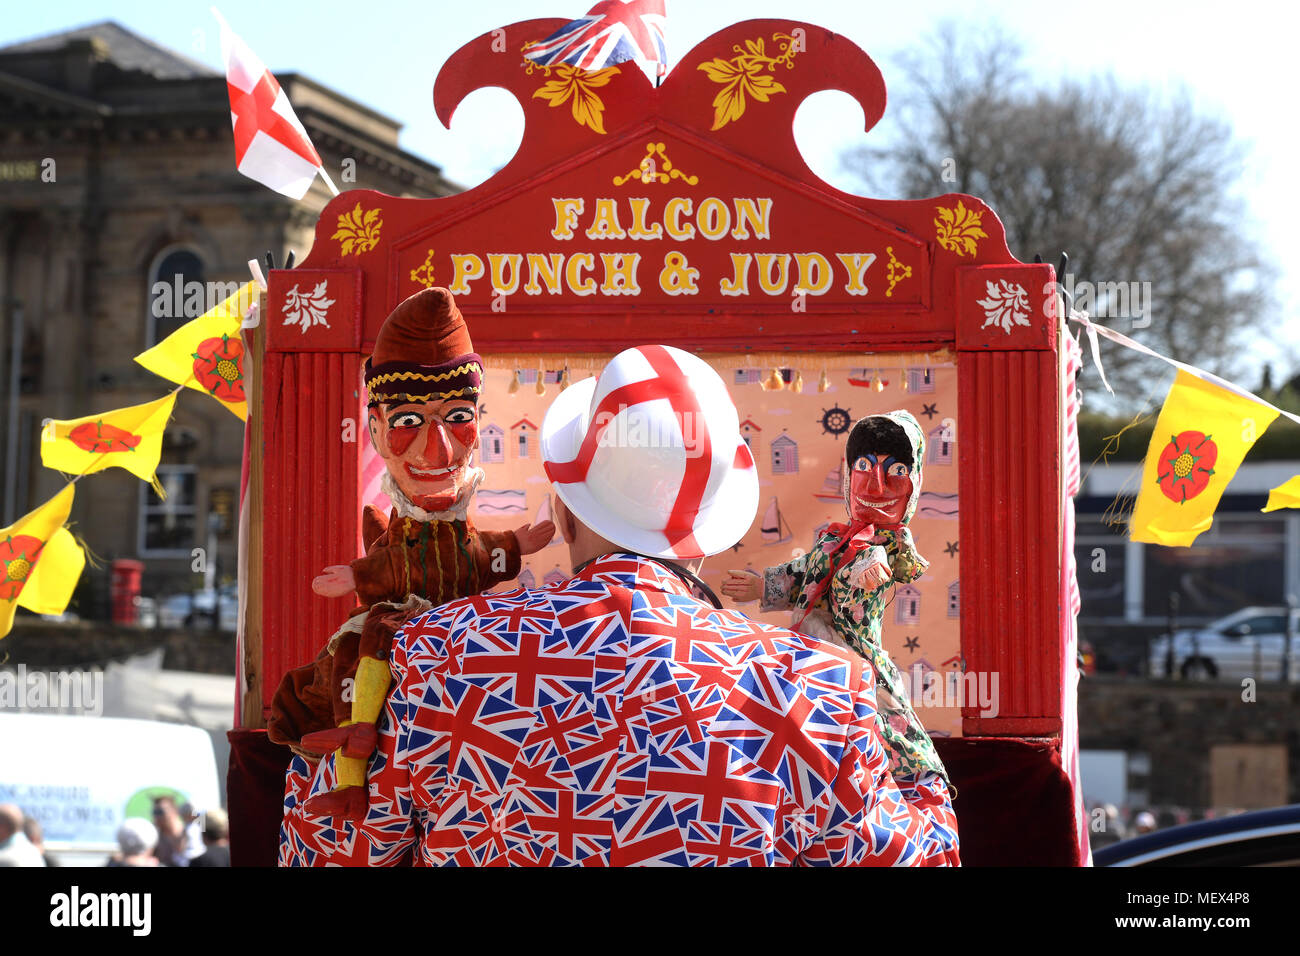 St George's Day / Punch & Judy, Darwen / Clitheroe, Lancashire 23rd April 2018 Stock Photo